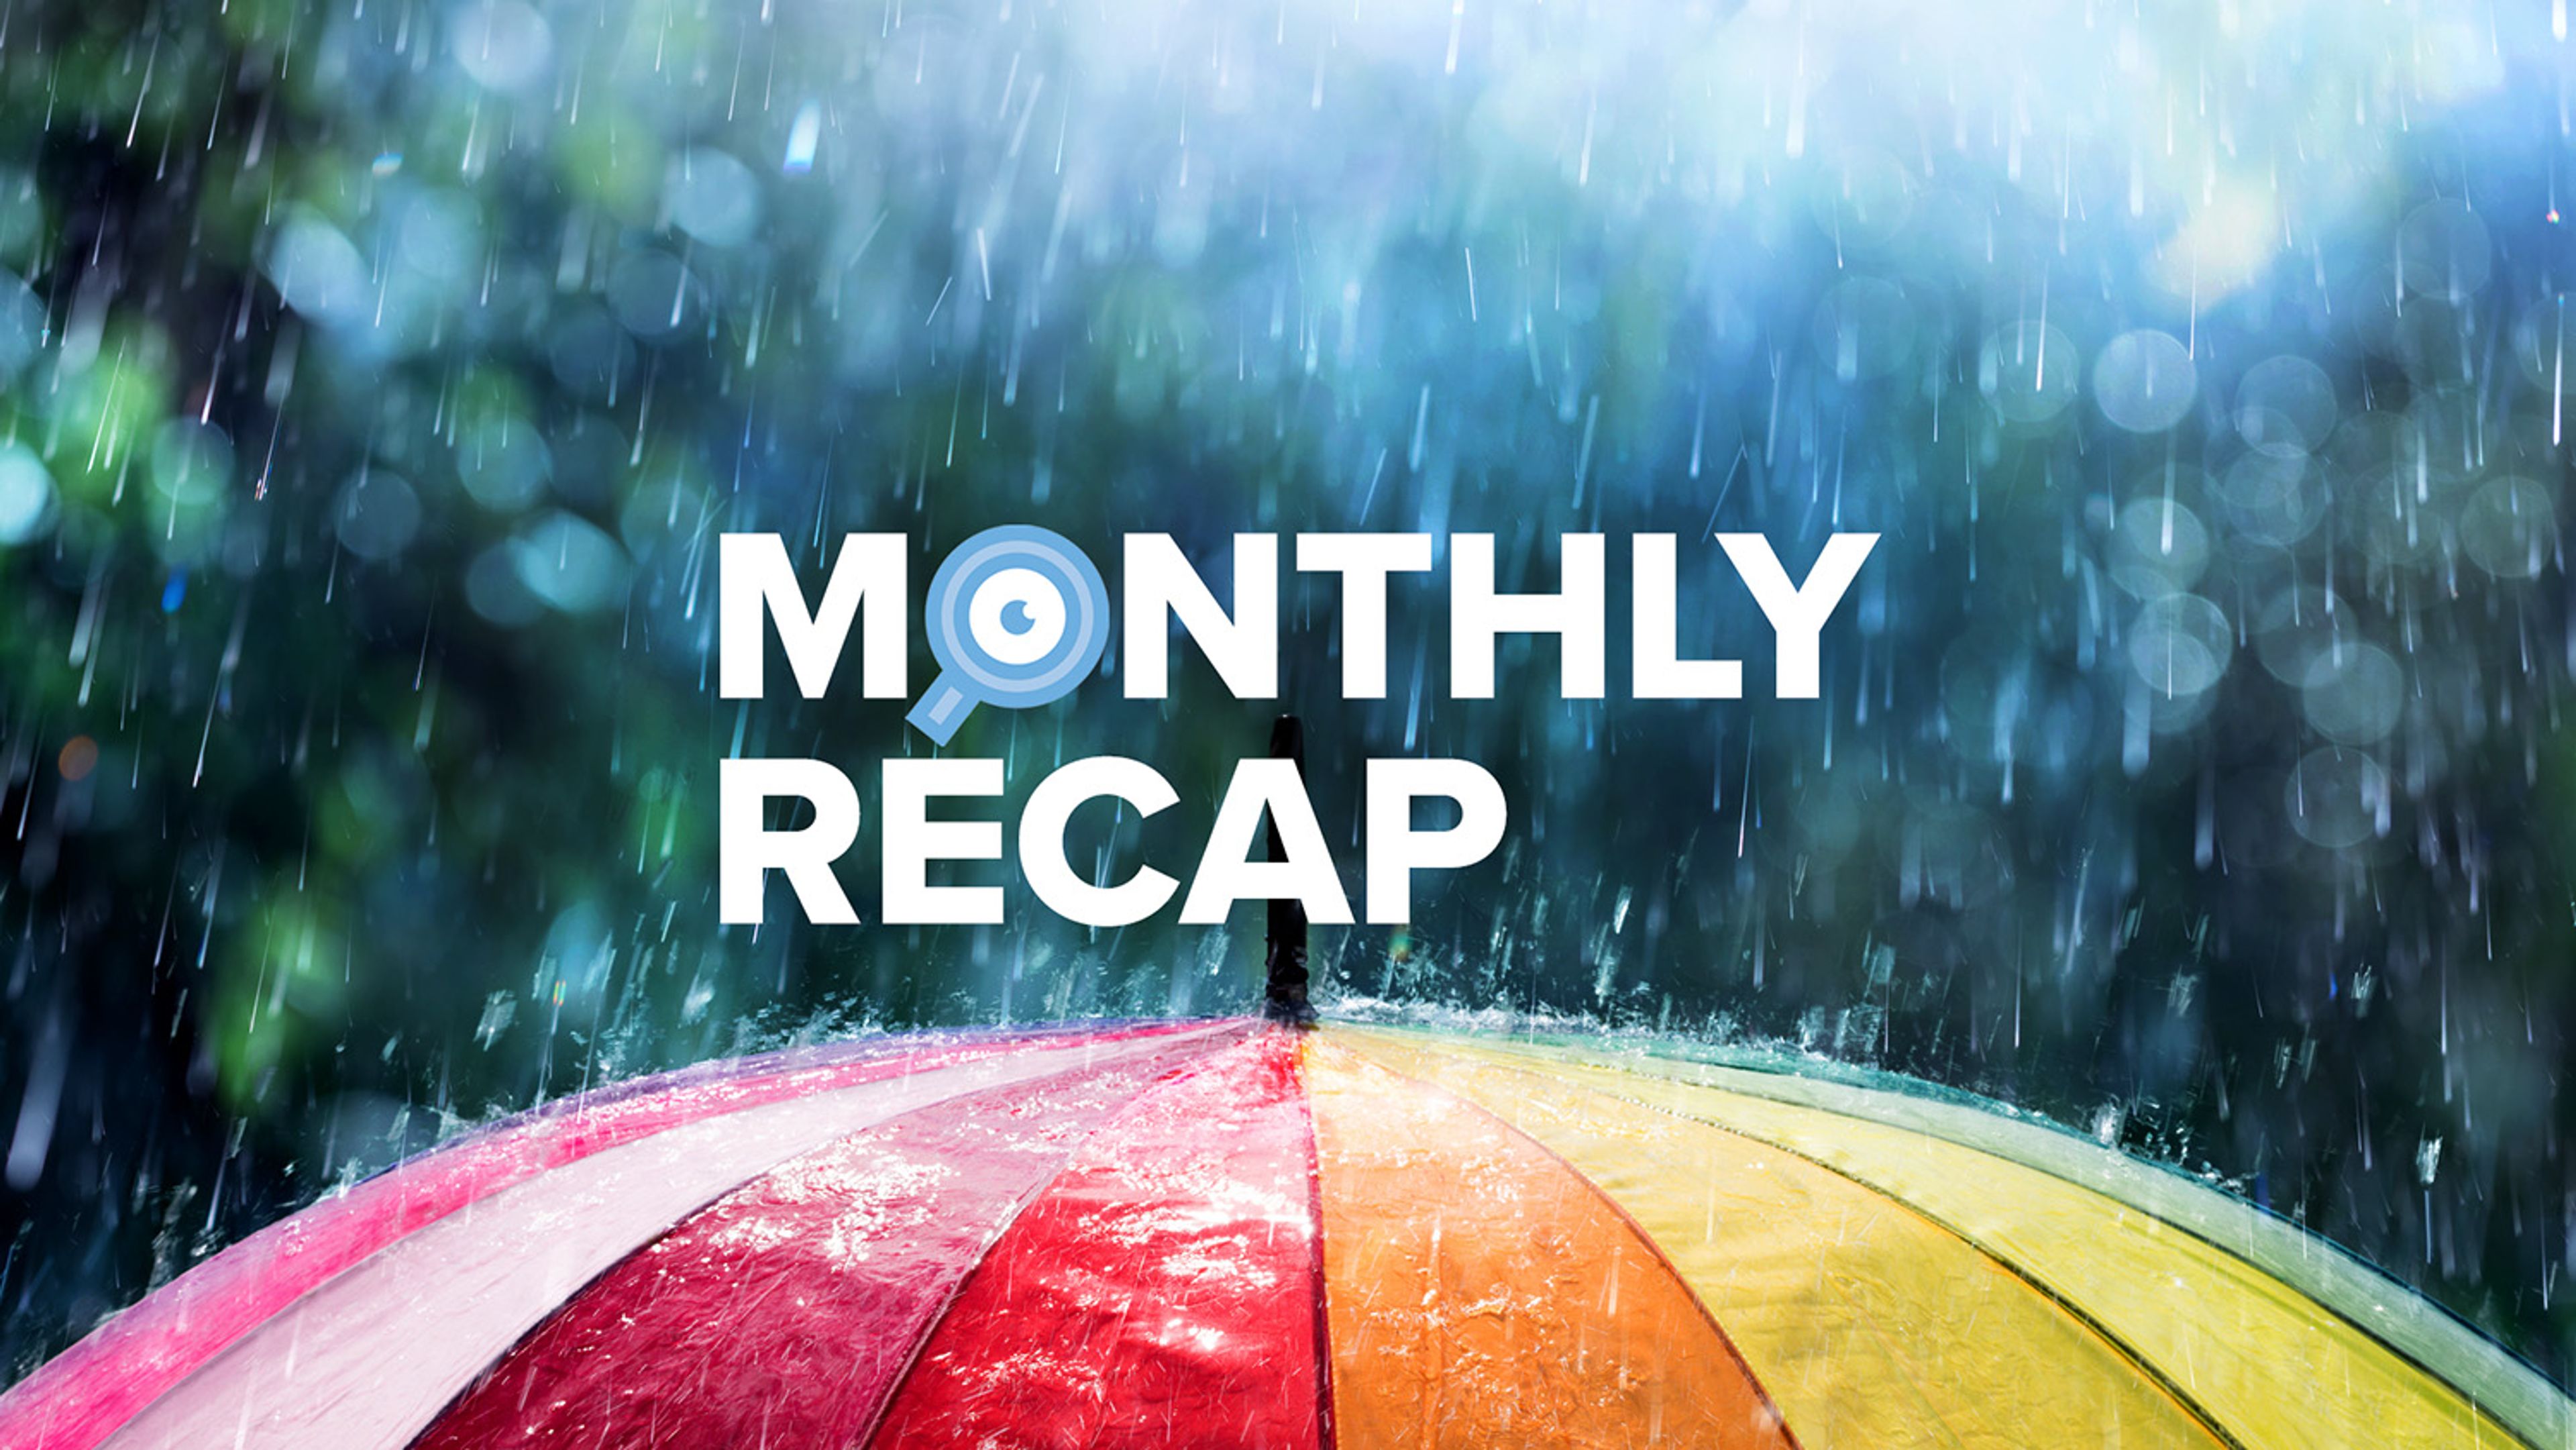 Featured image of April monthly recap of an umbrella with raindrops